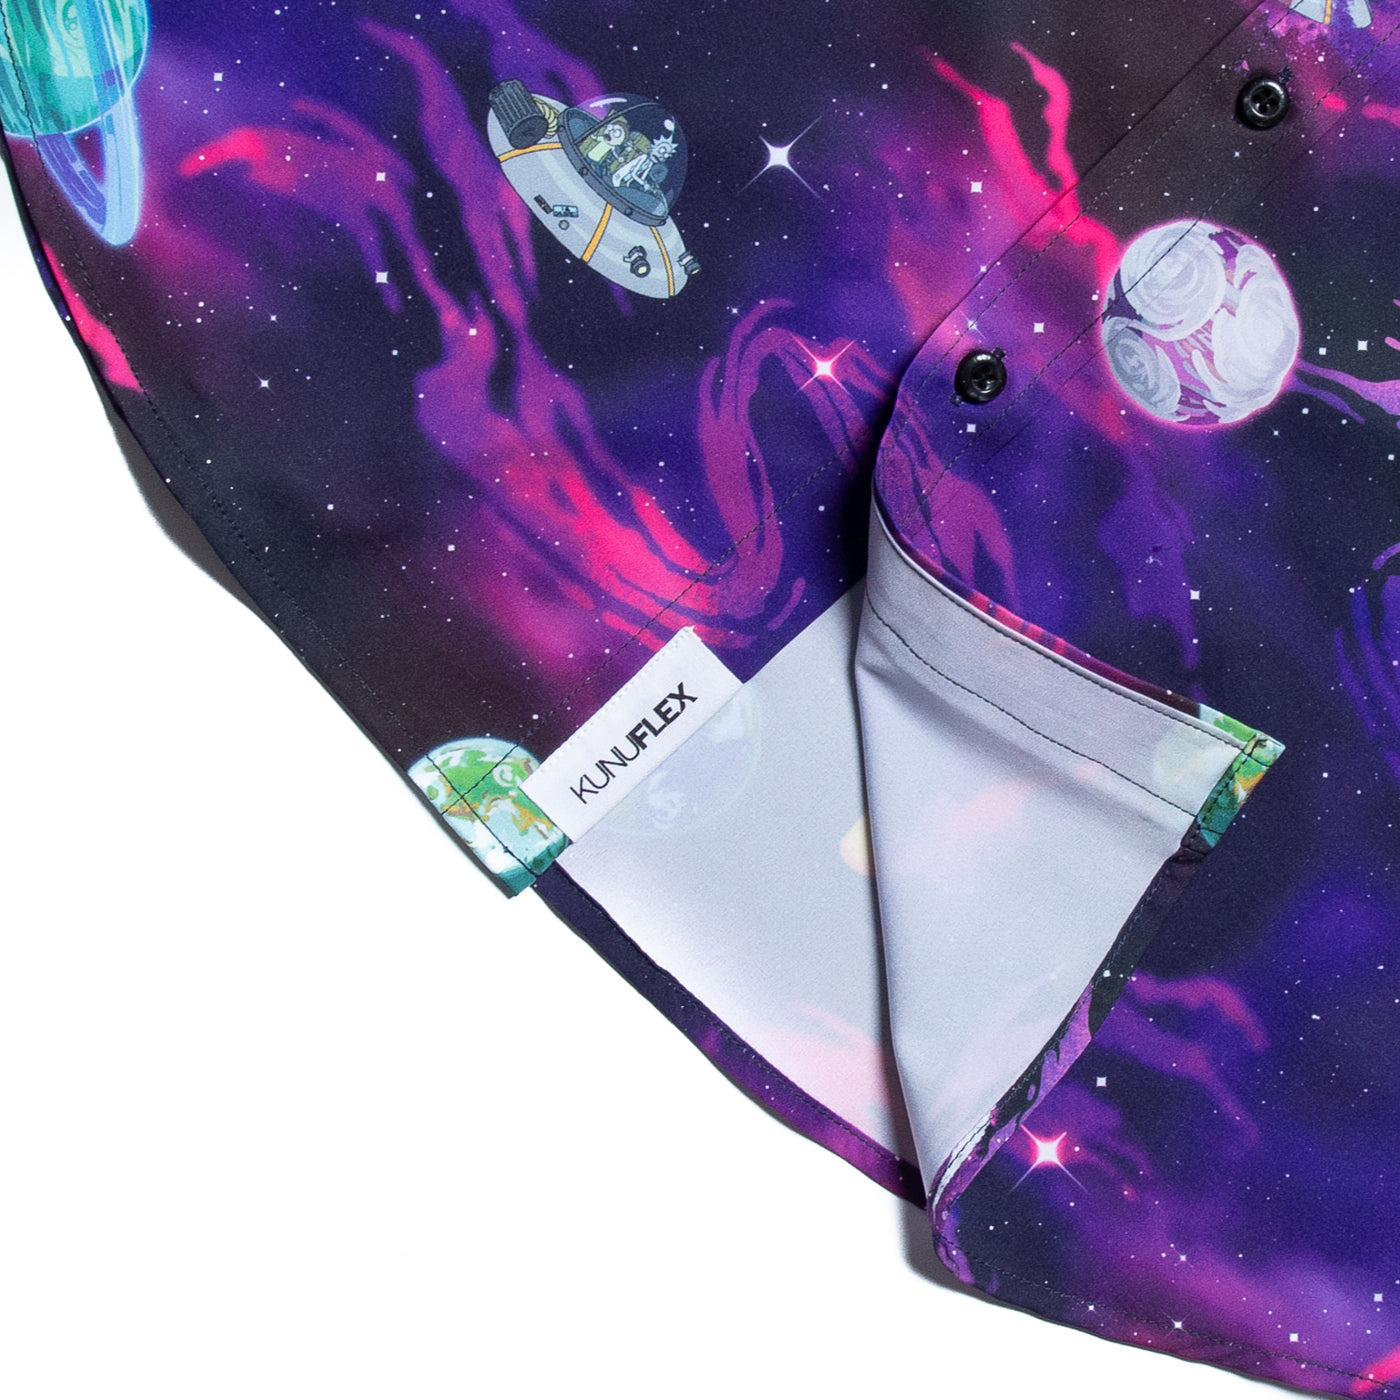 Rick and Morty Space Button Down Shirt